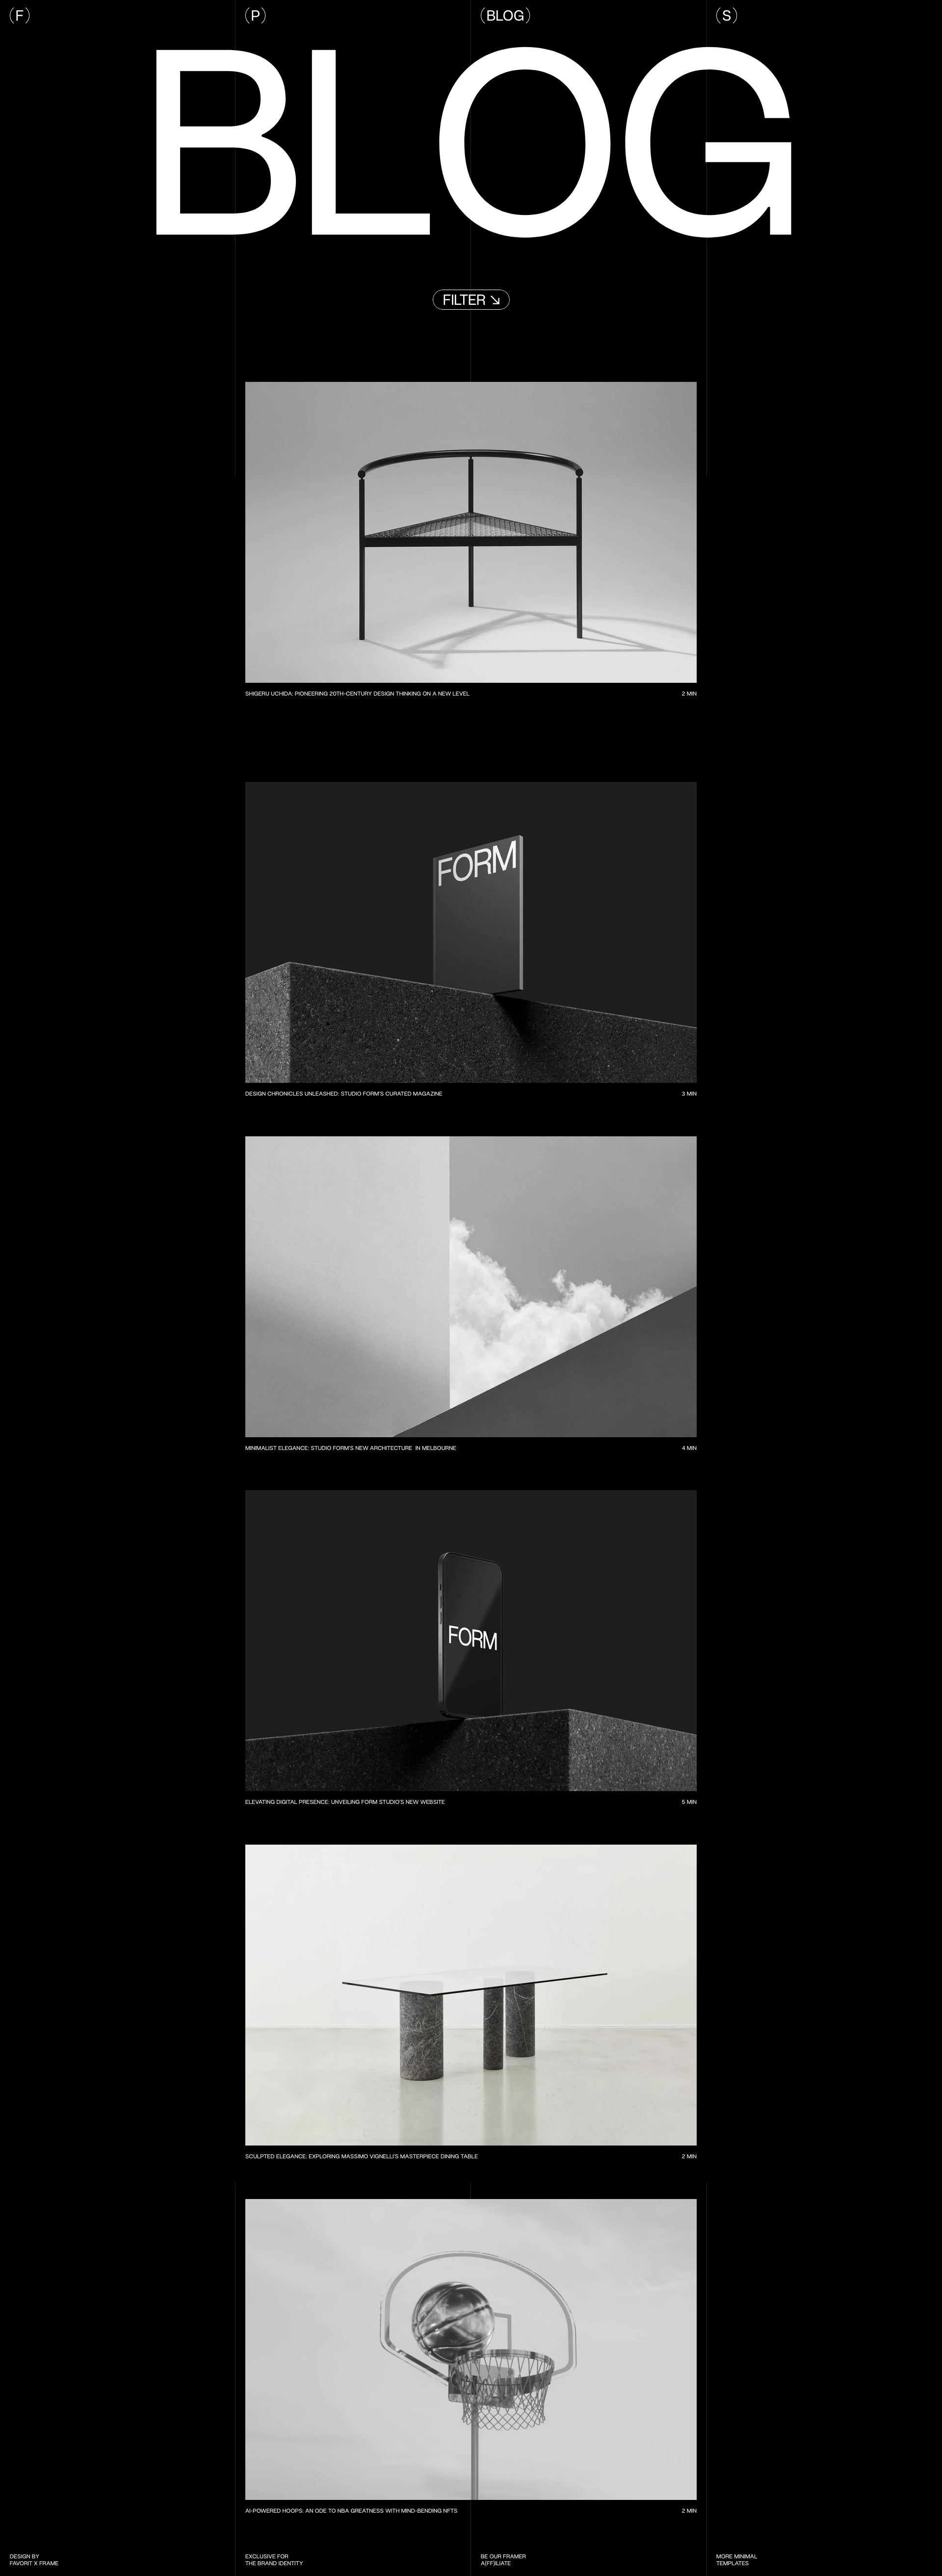 Form Studio Landing Page Example: Welcome to Form Studio – where brands discover their rhythm, creativity comes alive, and ideas know how to have a good time. We’re the studio that fearlessly bends the rules and champions the elegance of simplicity. Renowned brands choose us because we maintain the brand language and still push boundaries.